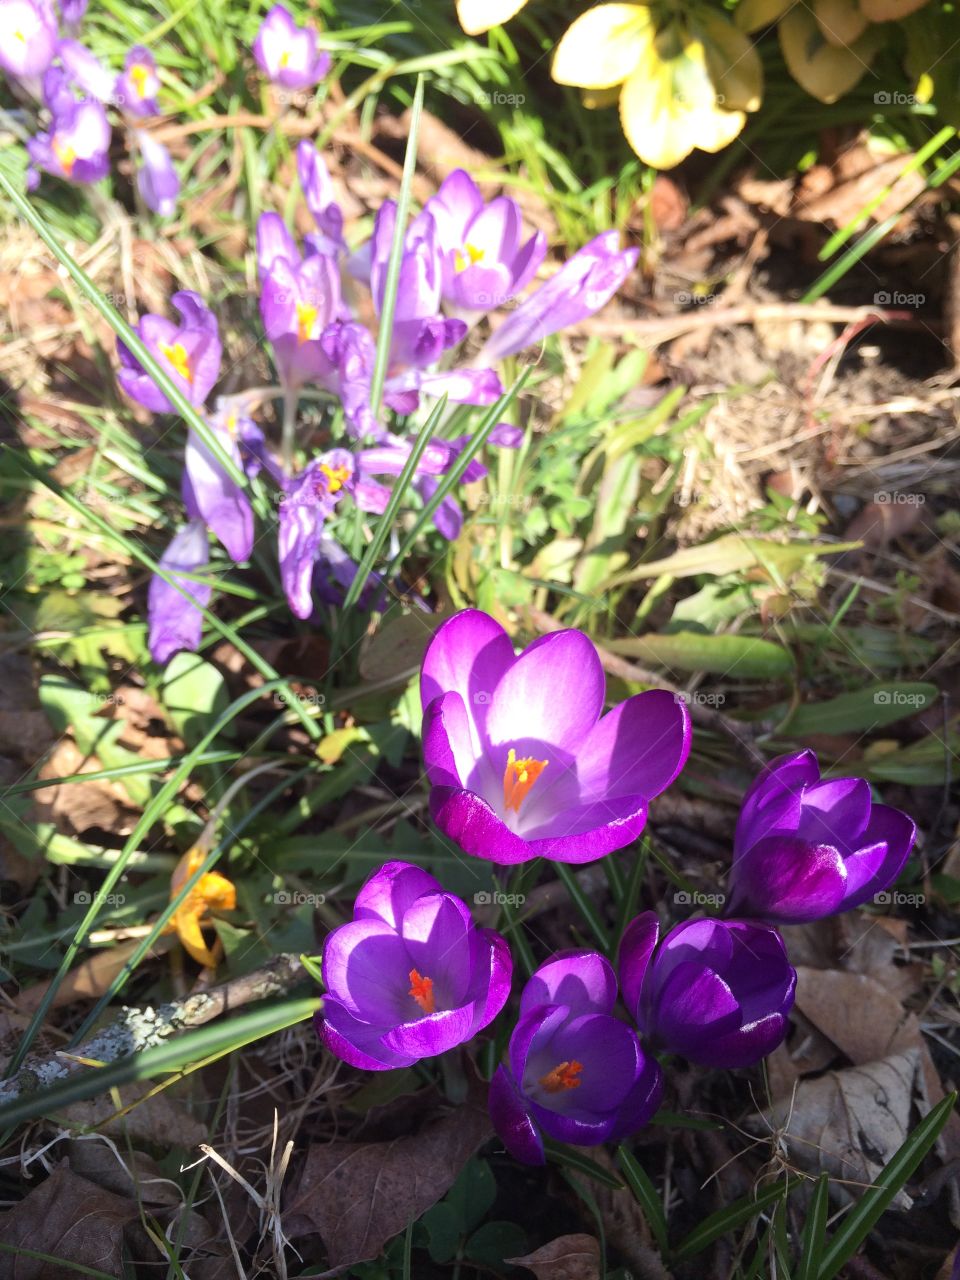 Spring is coming with Crocuses